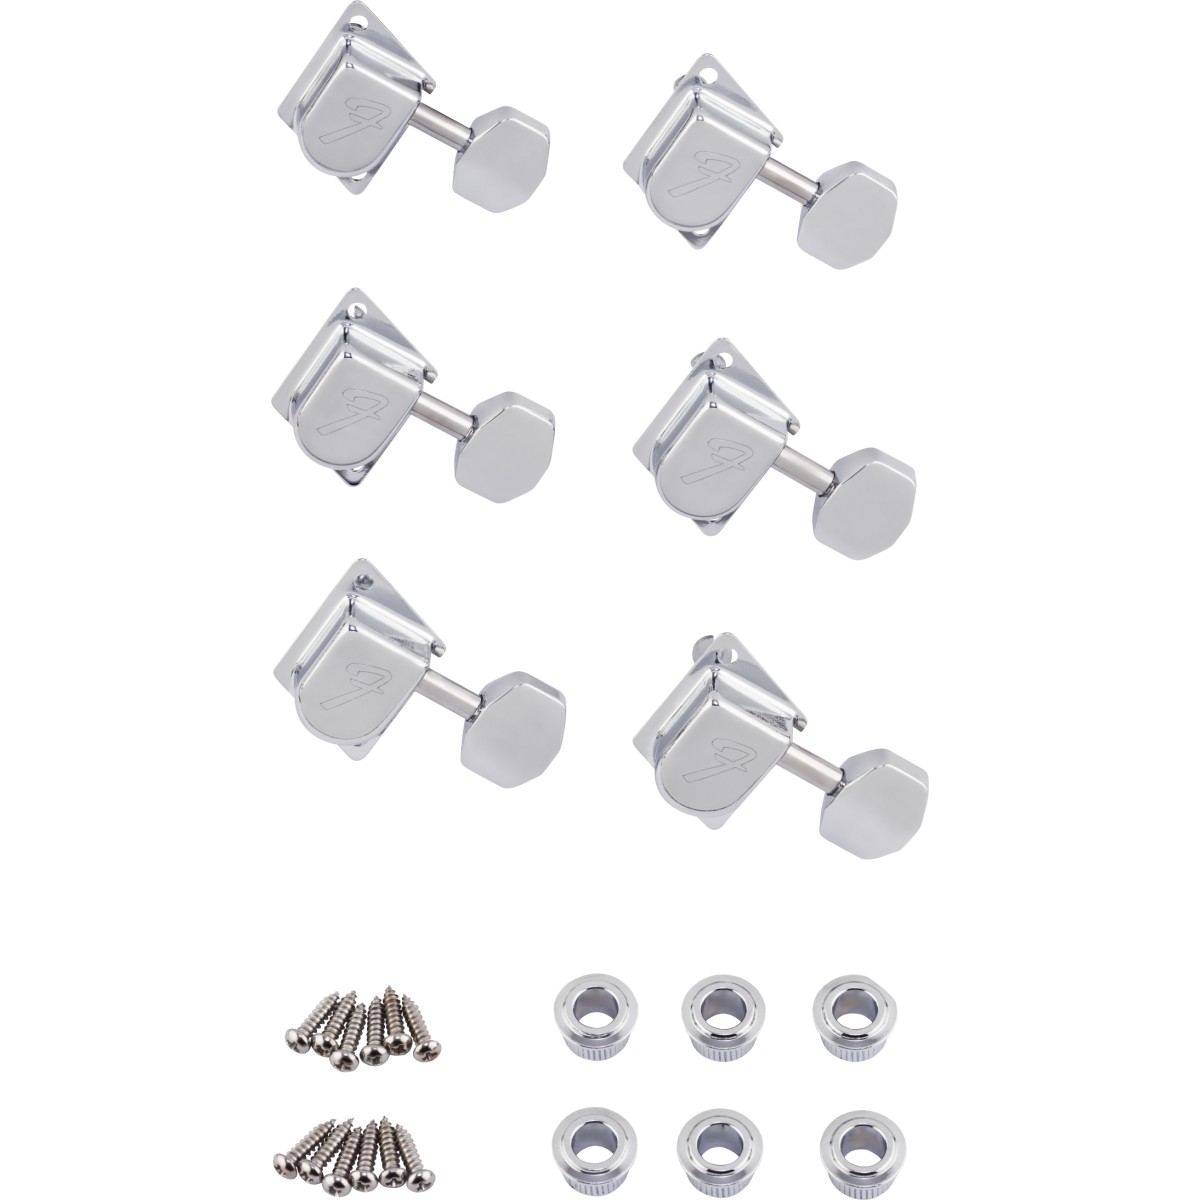 Fender Parts 70s "F" Style Stratocaster/Telecaster Tuning Machines Chrome (6) Chrome 0990822100